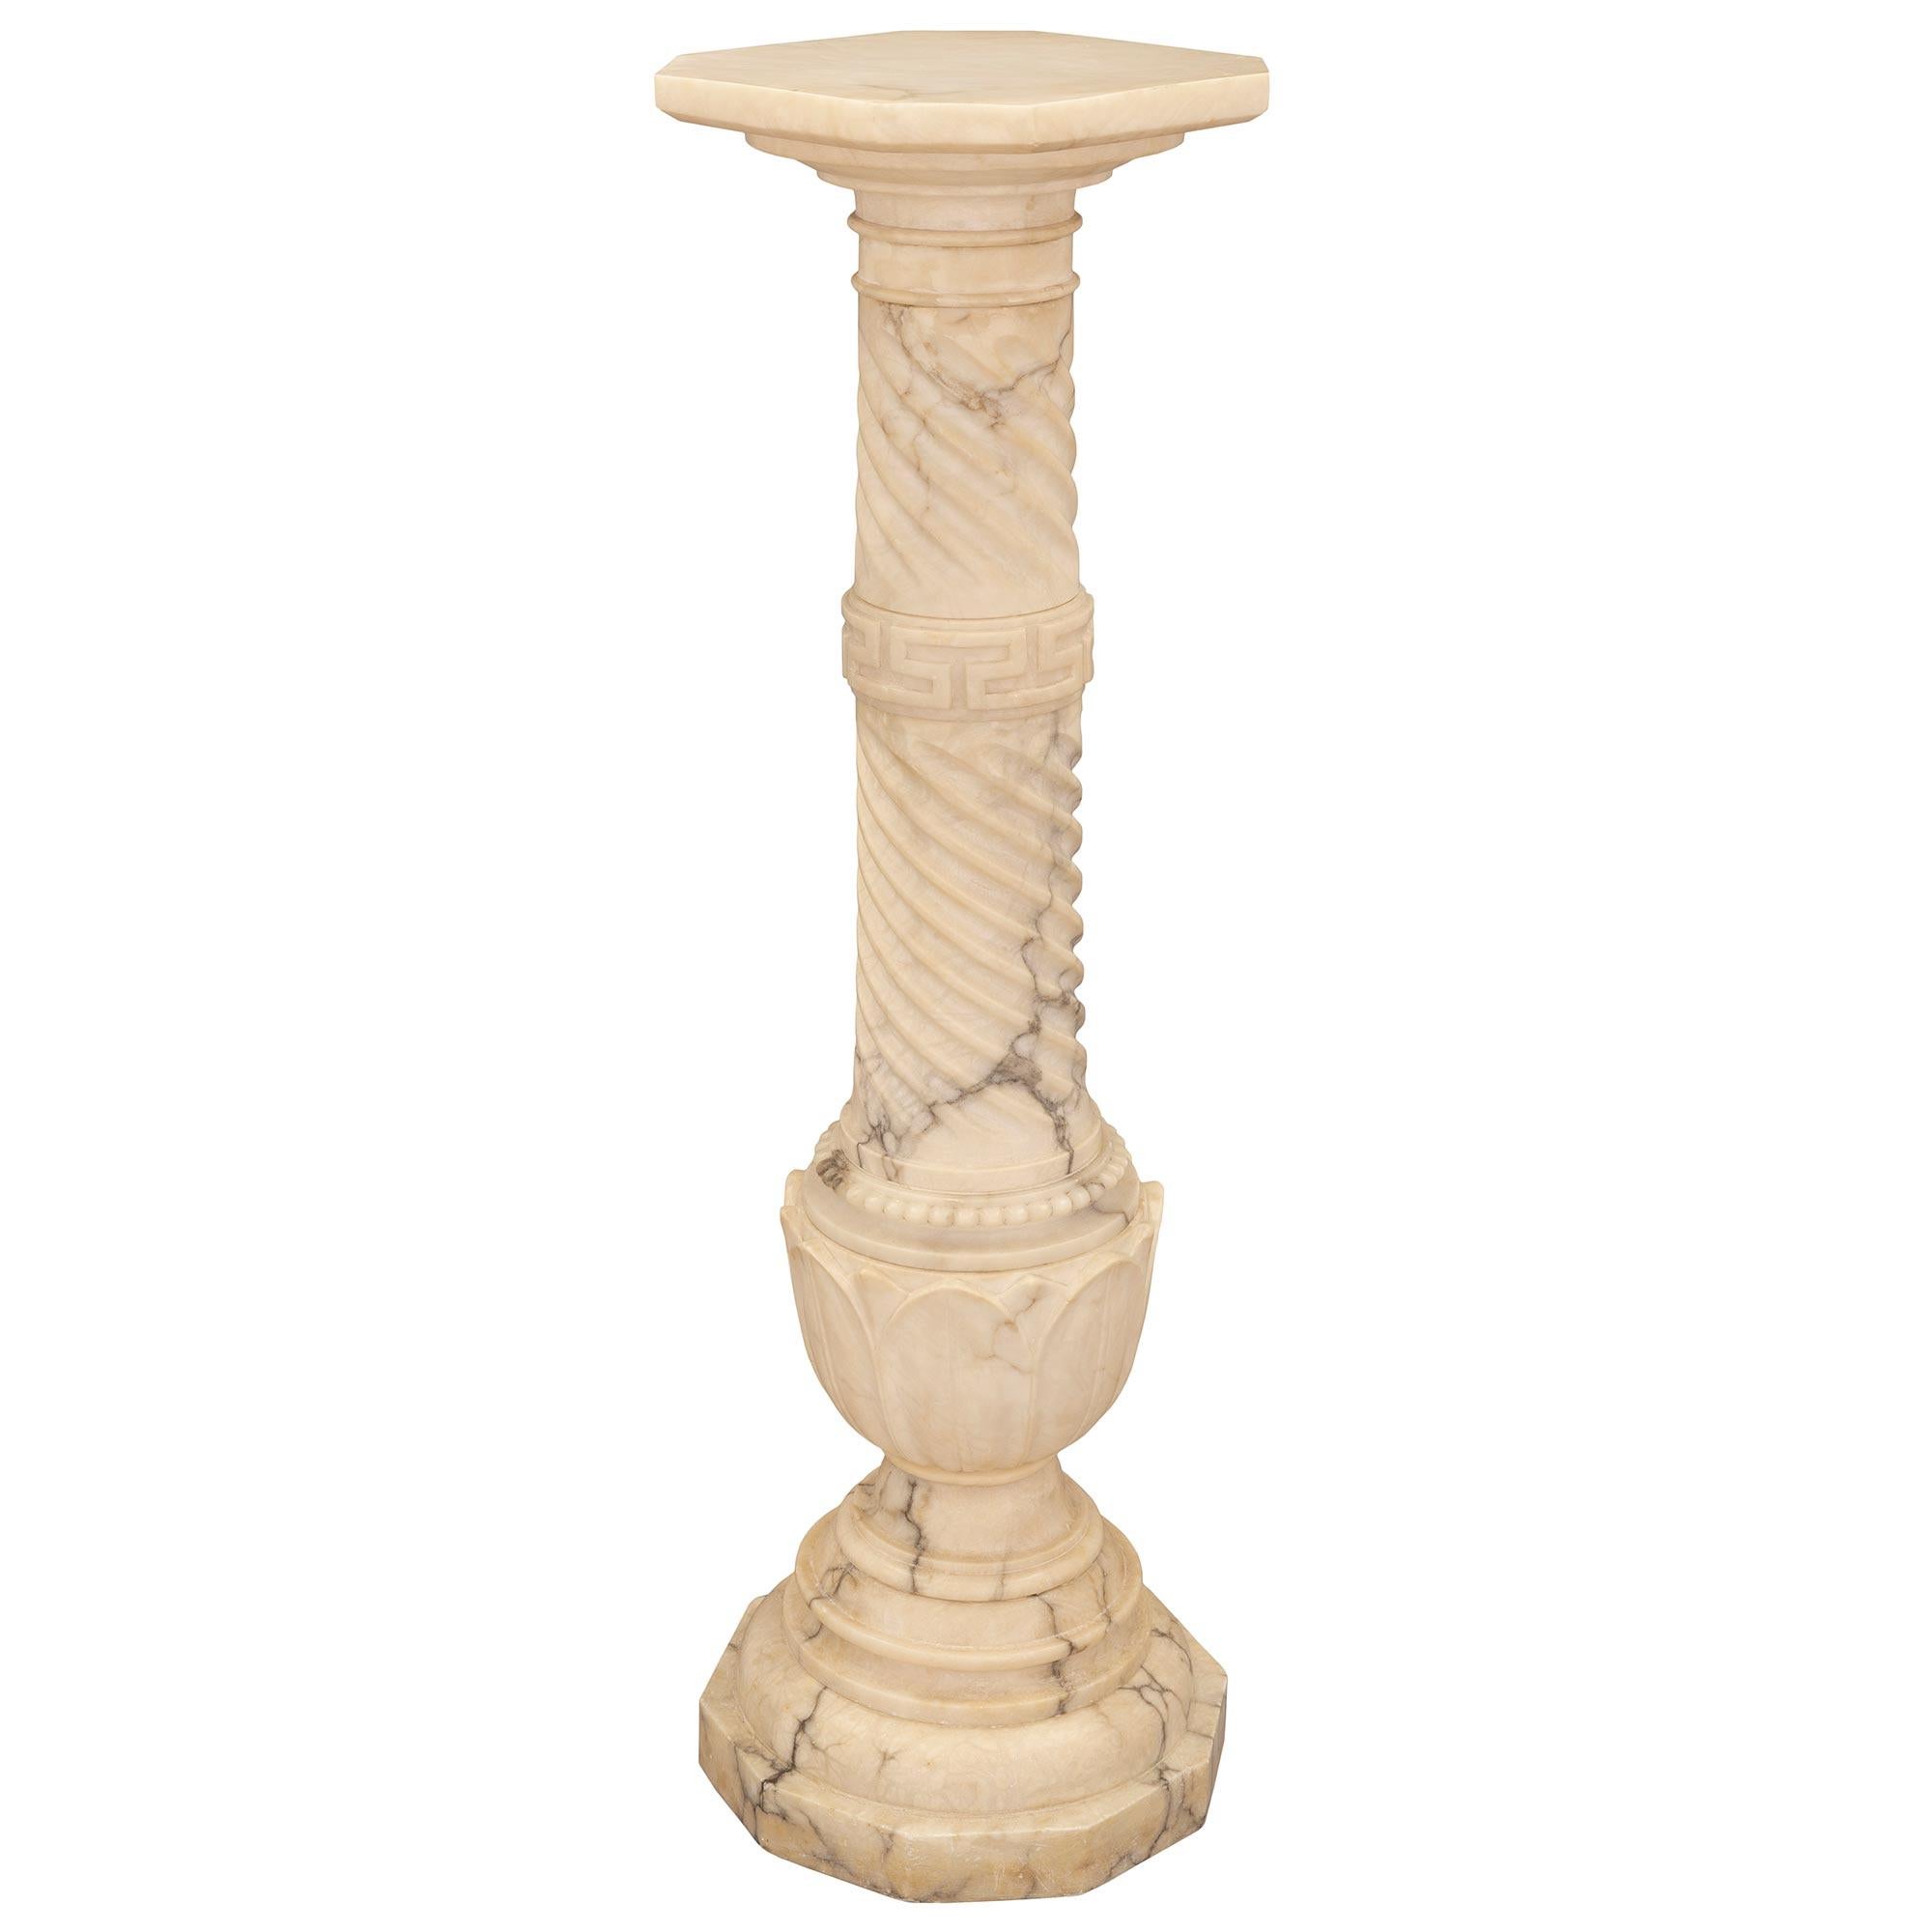 Italian 19th Century Neo-Classical St. Alabaster Pedestal Column In Good Condition For Sale In West Palm Beach, FL